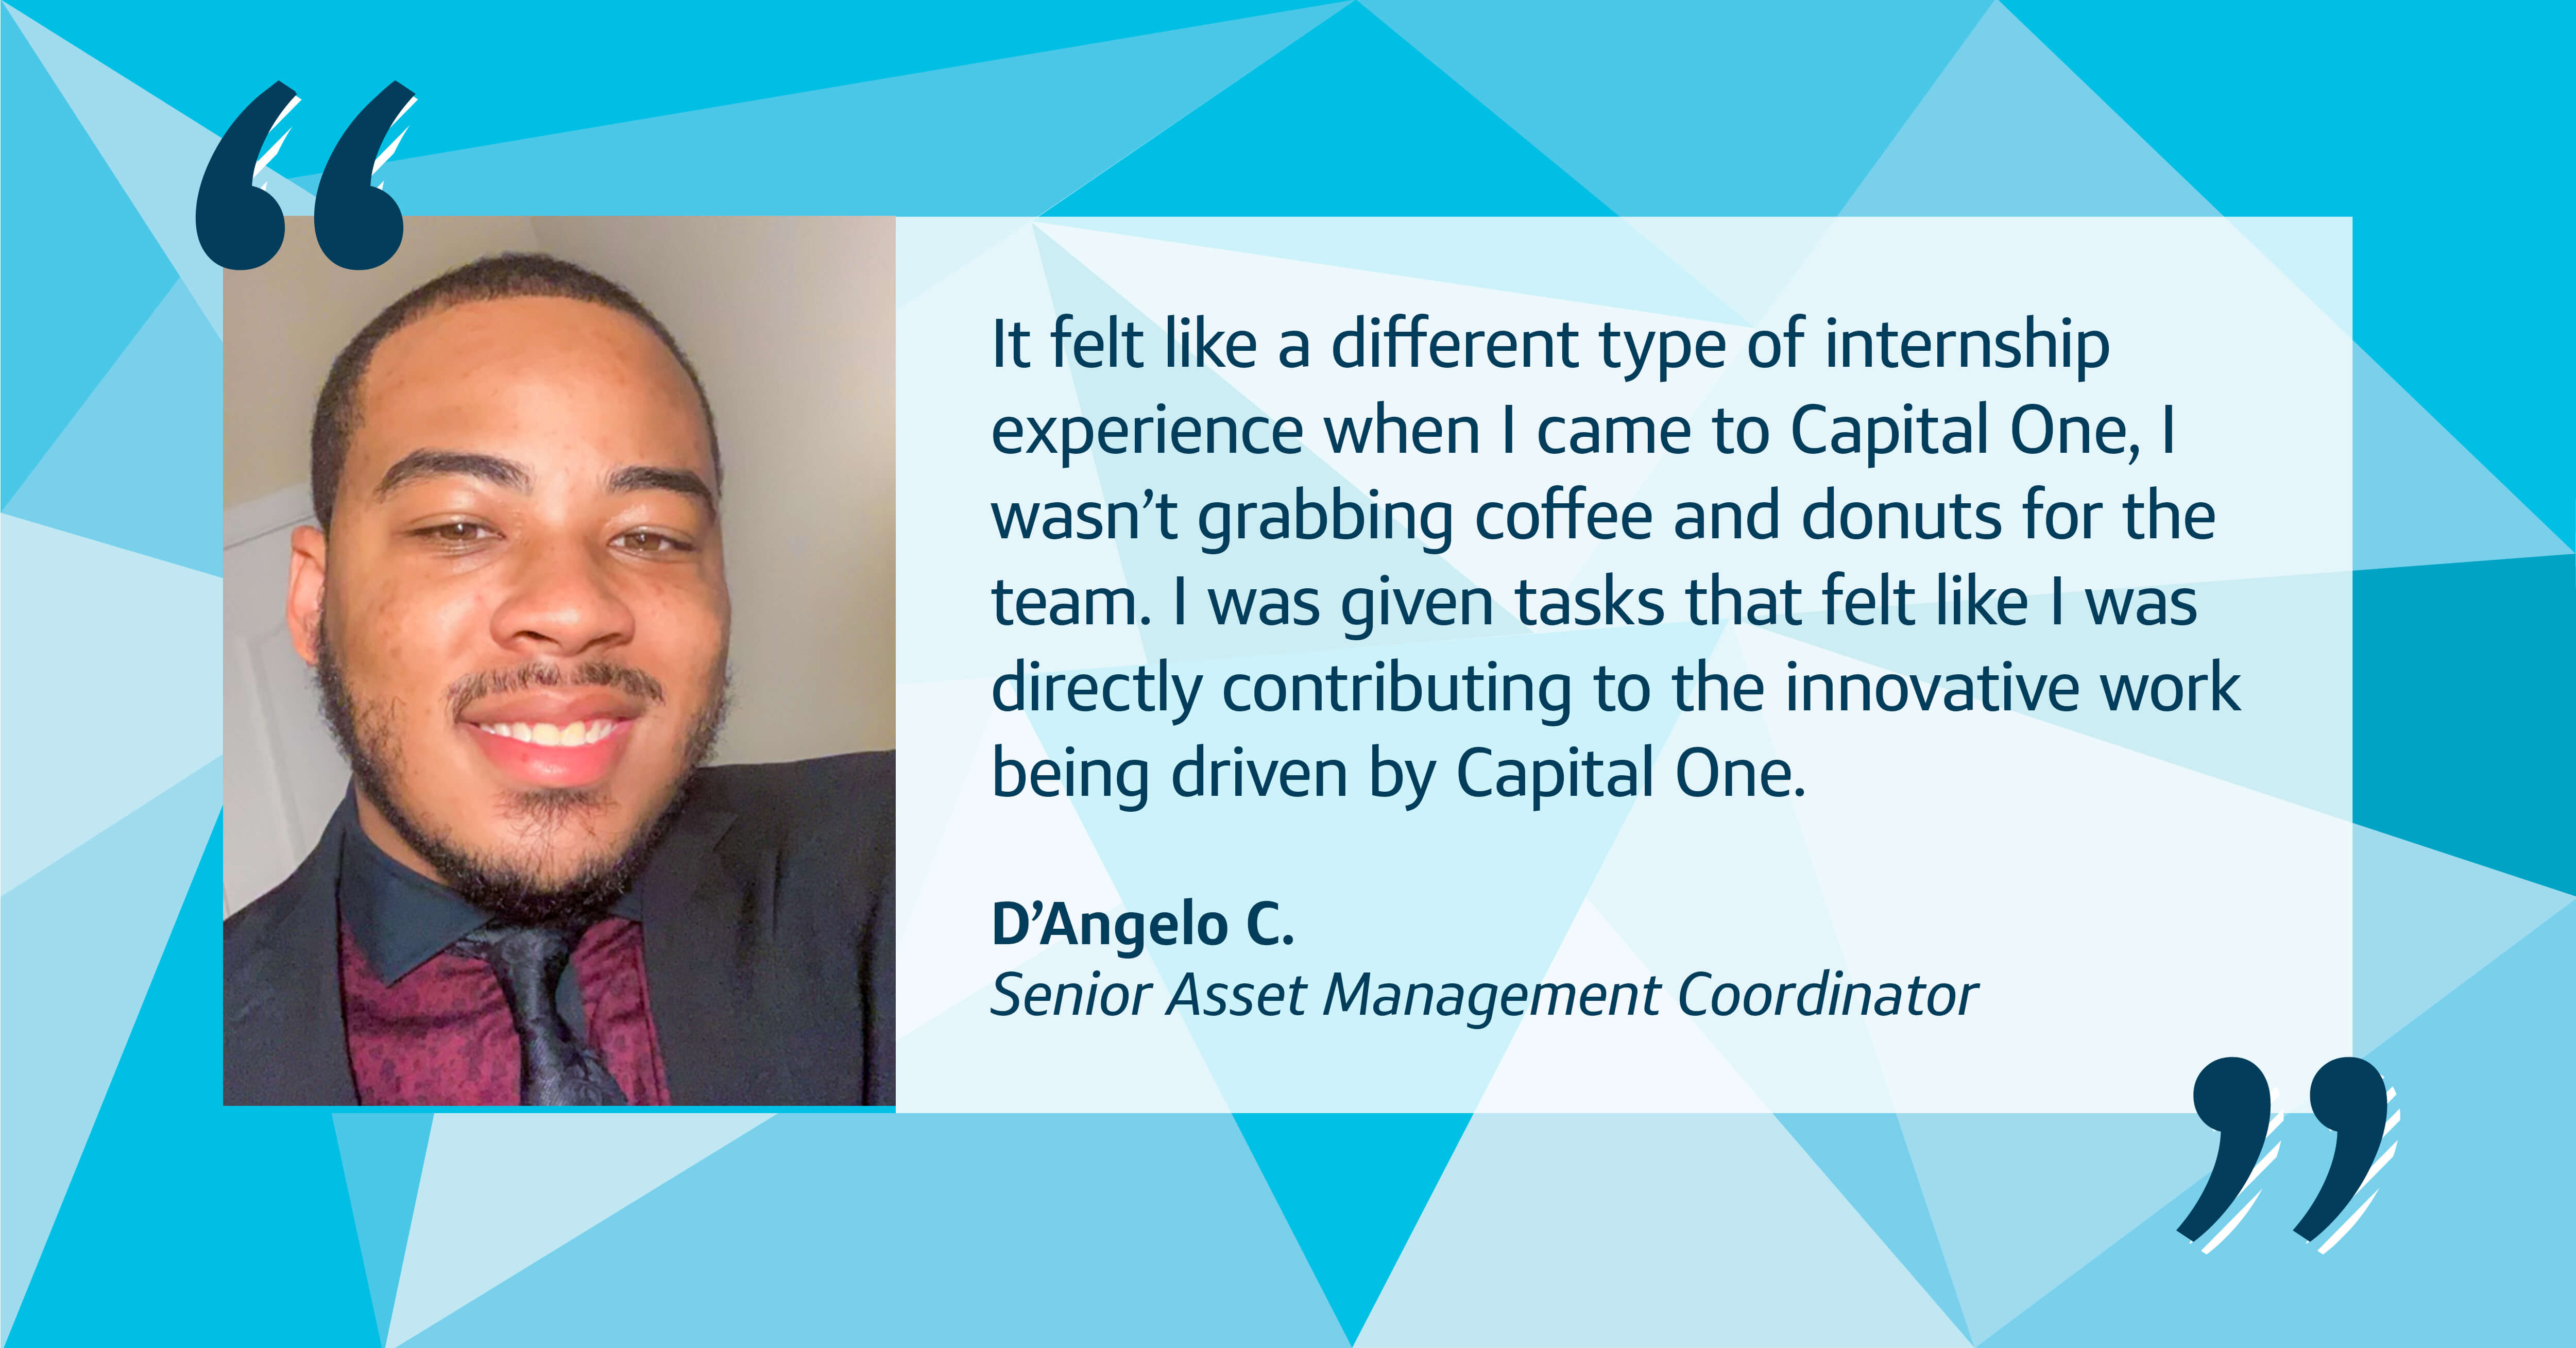 Image quote with picture of D’Angelo, Capital One Senior Asset Management Coordinator, that says, “it felt like a different type of internship experience when I came to Capital One, I wasn’t grabbing coffee and donuts for the team. I was given tasks that felt like I was directly contributing to the innovative work being driven by Capital One.” 